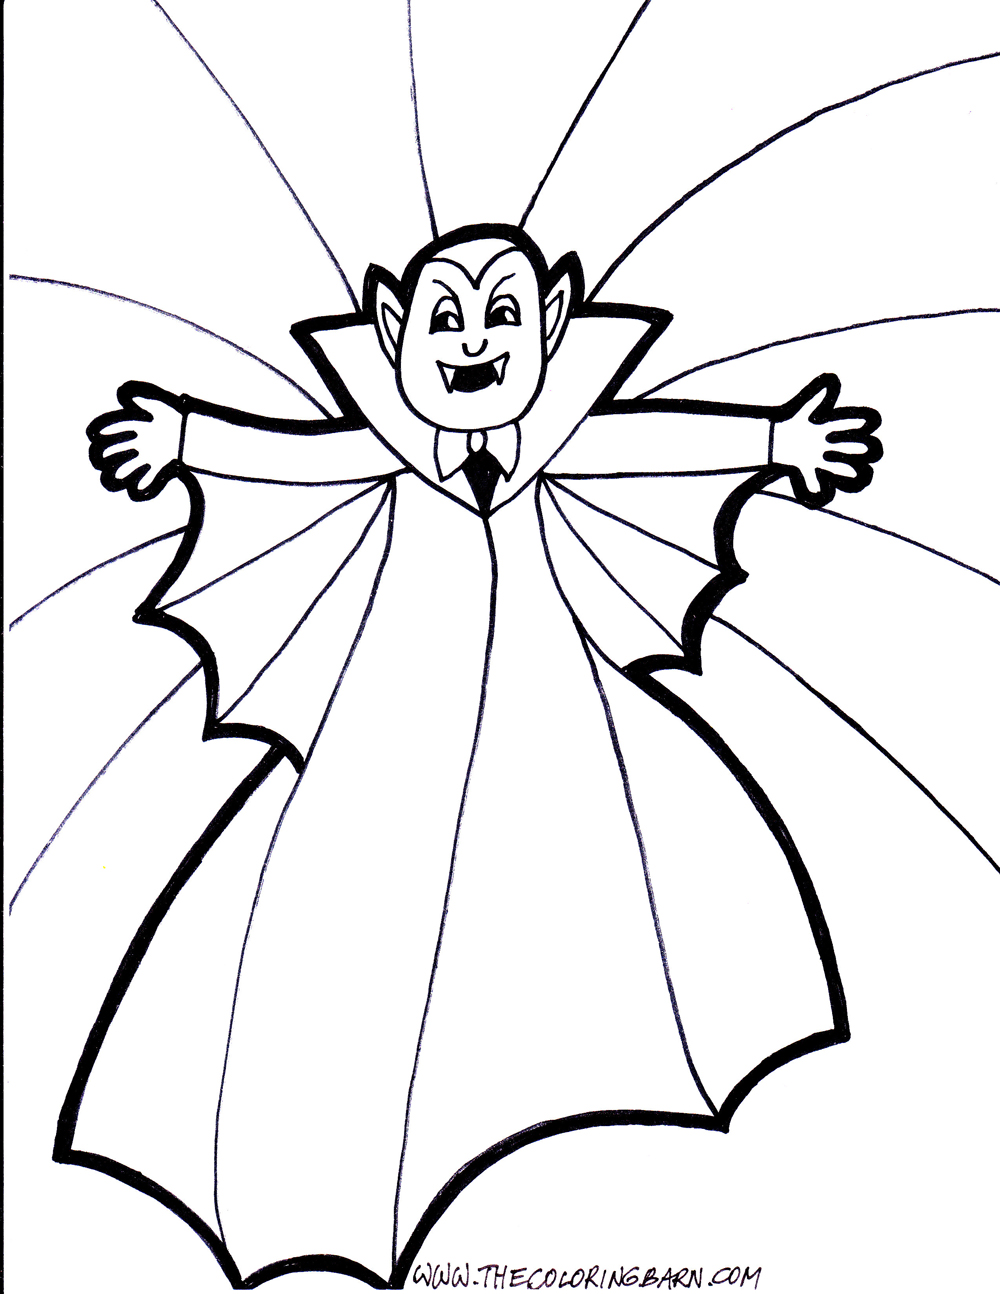 Vampire Coloring Pages - The Coloring Barn